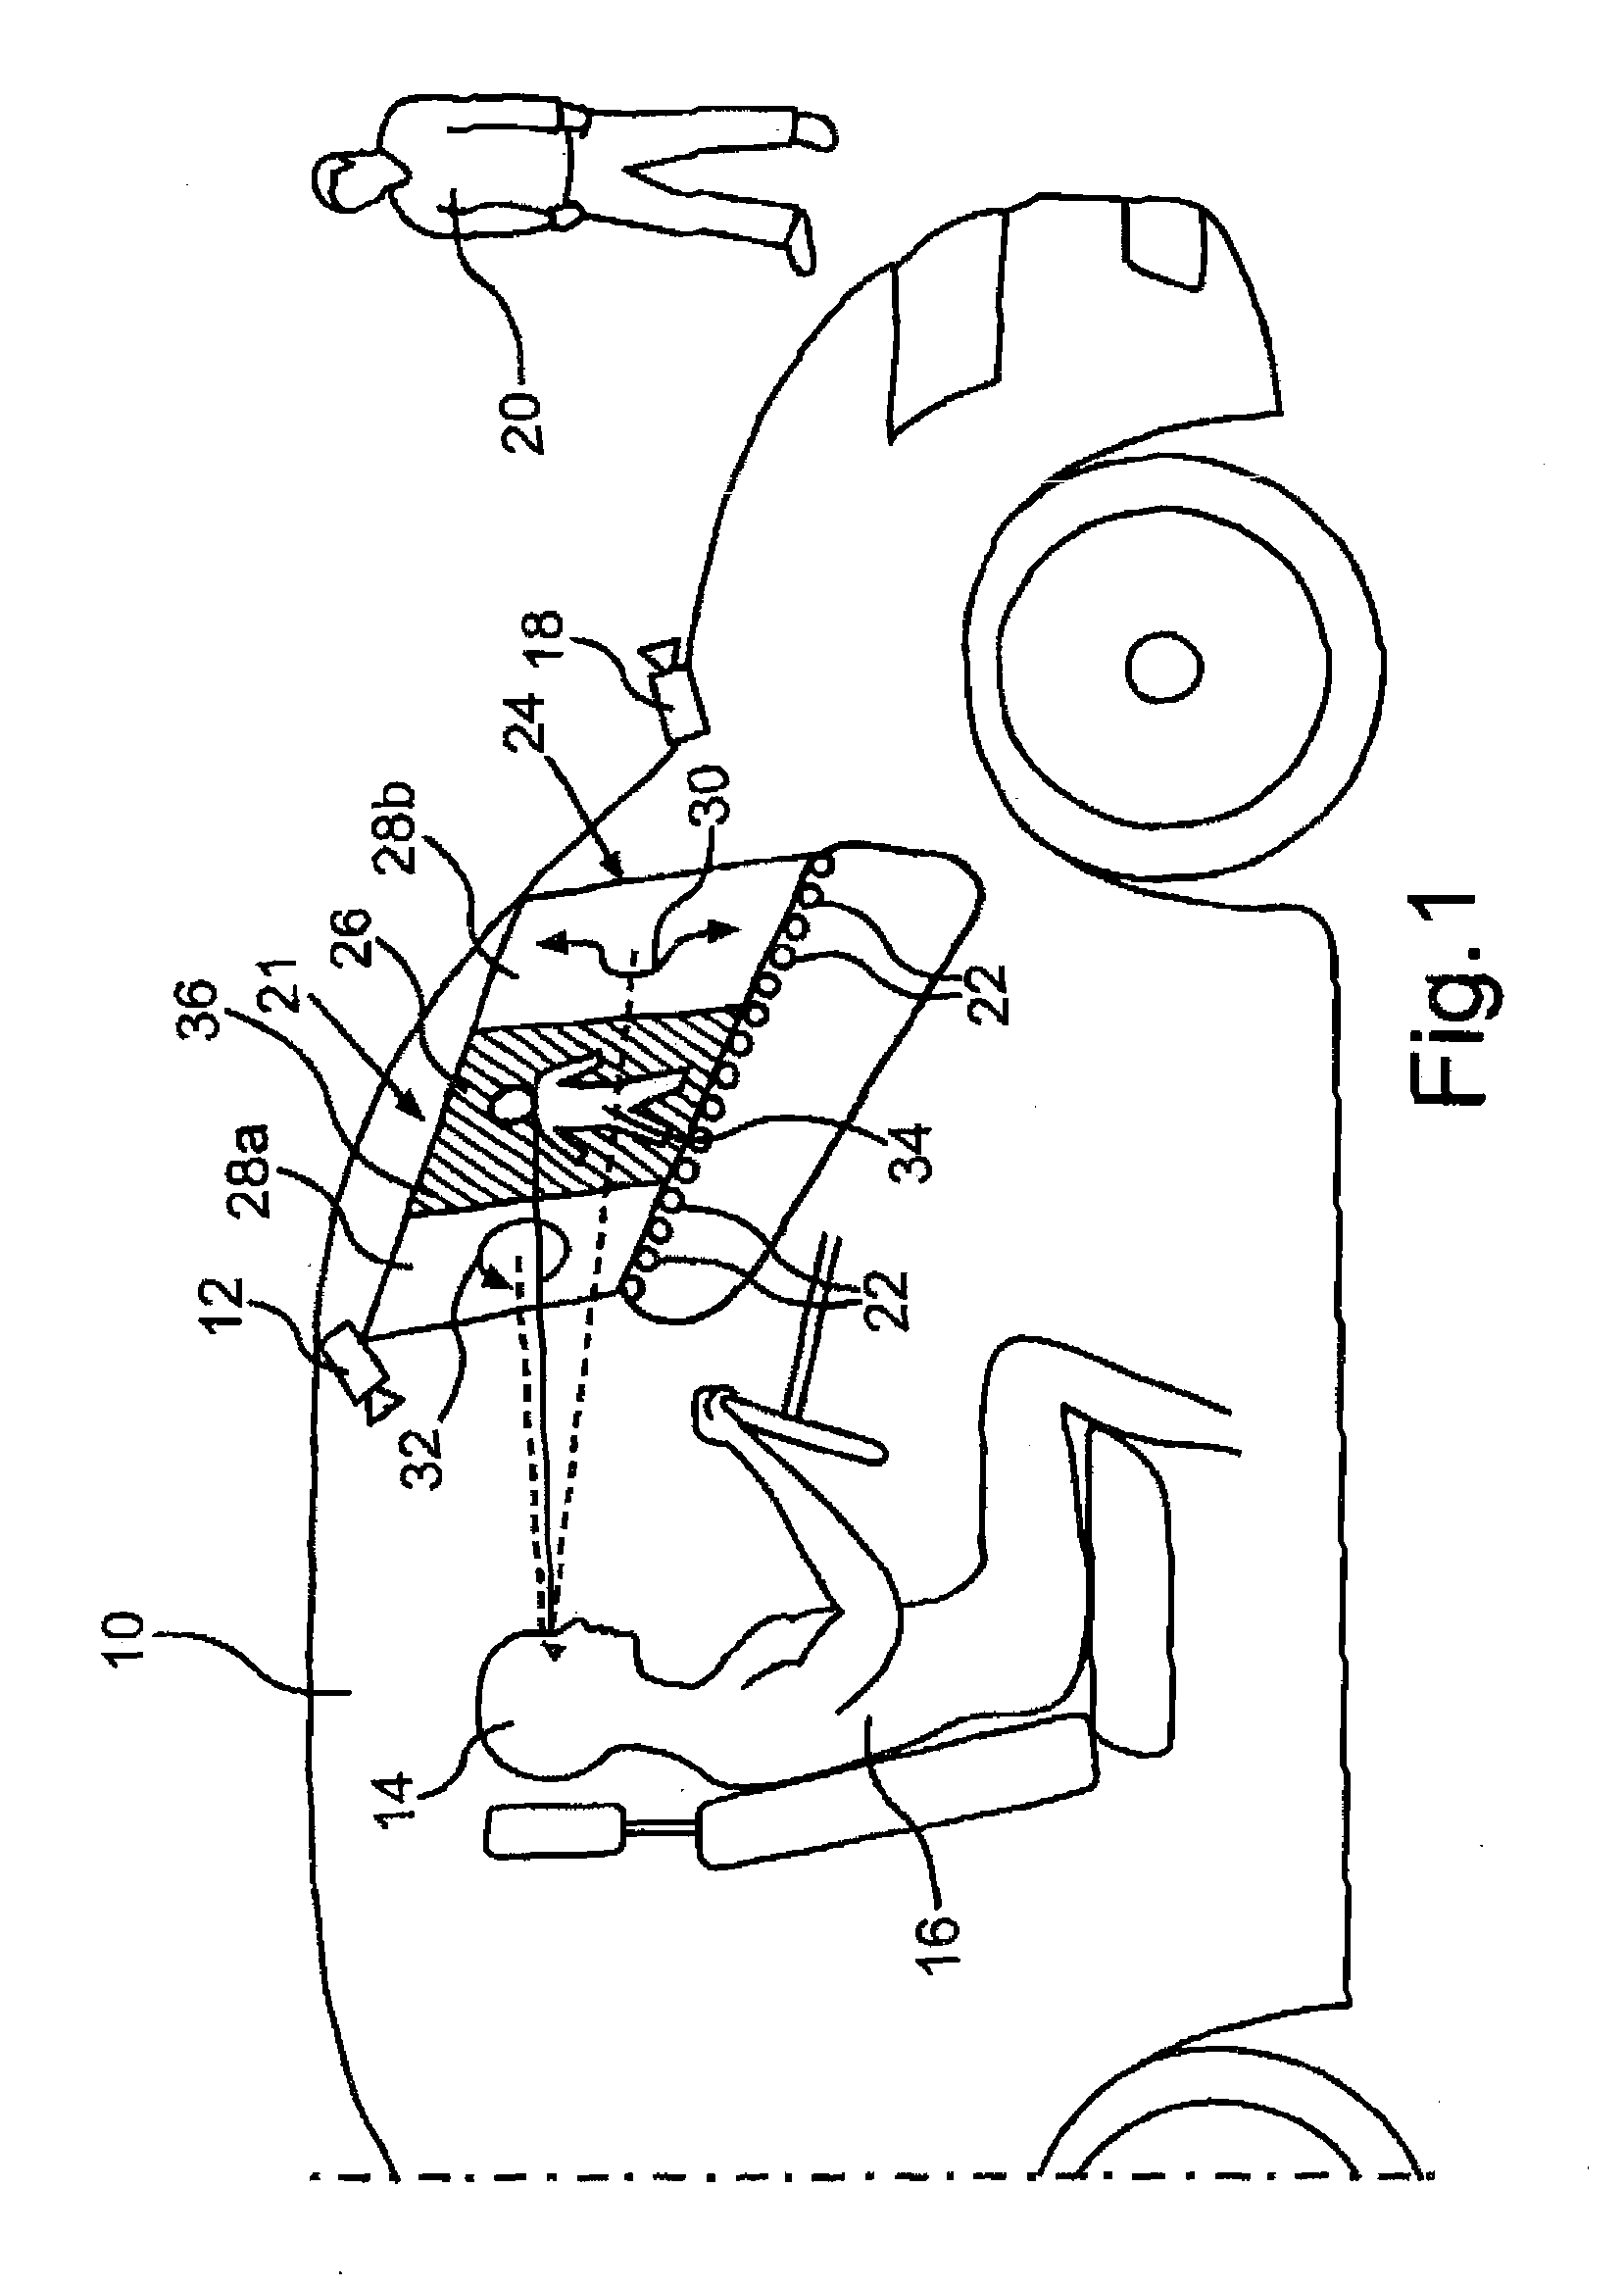 Method for providing a representation in a motor vehicle depending on a viewing direction of a vehicle operator